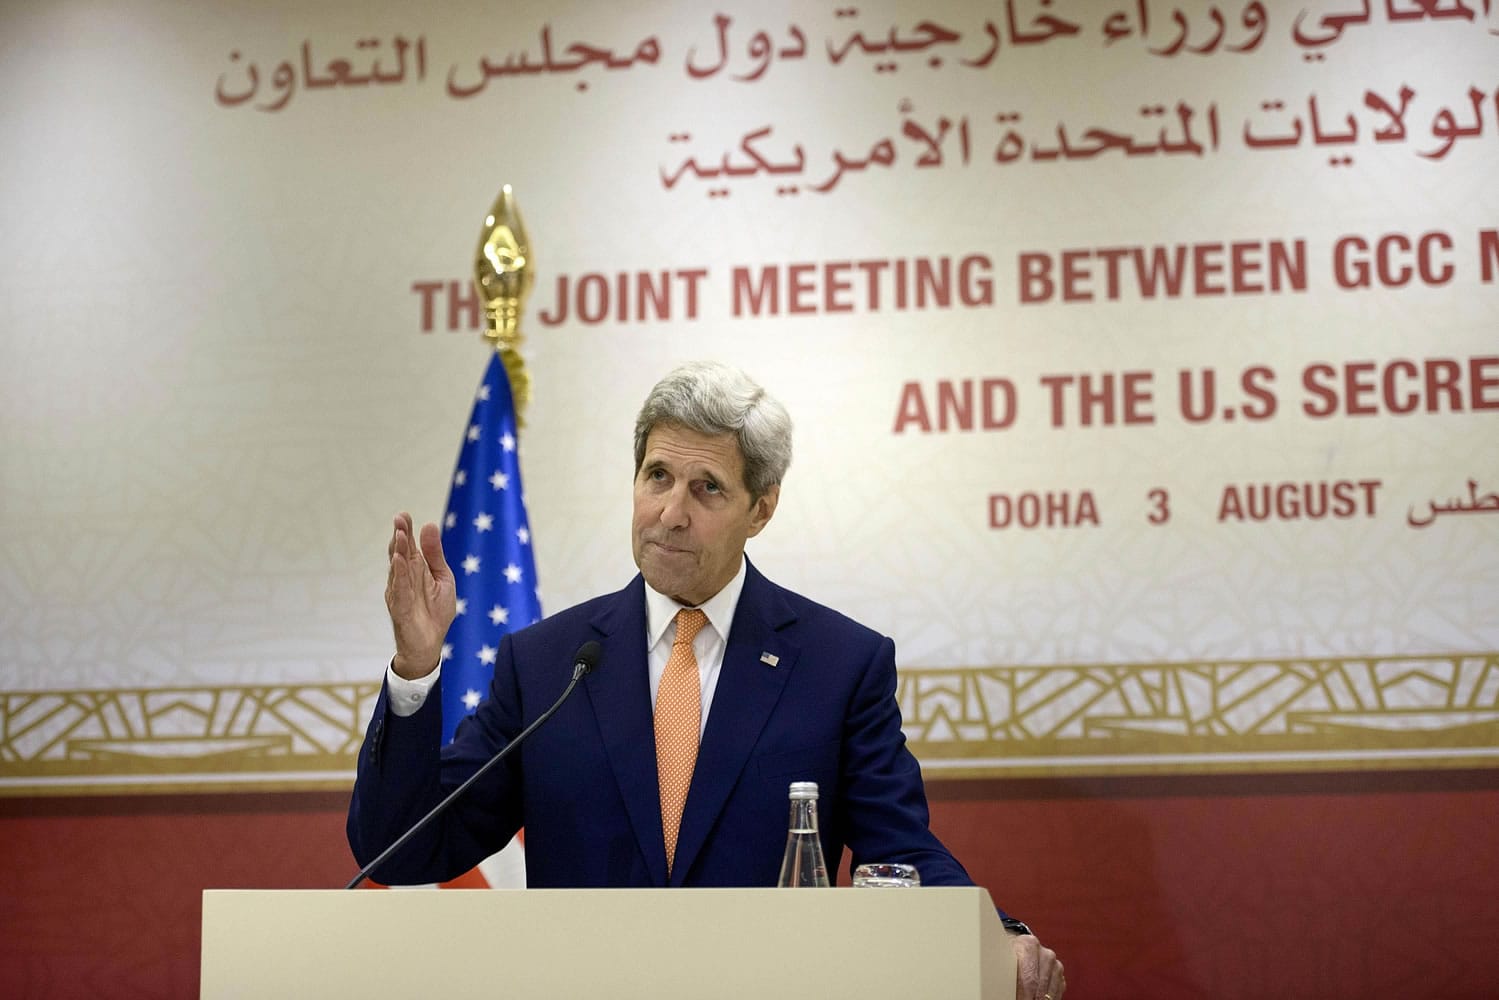 U.S. Secretary of State John Kerry speaks during a press conference following a meeting with foreign ministers of the Gulf Cooperation Council (GCC) on Monday, Aug. 3, 2015 in Doha. Qatari Foreign Minister Khaled al-Attiyah on Monday backed the deal on Iran's nuclear programme as the best available option, after talks in Doha with US Secretary of State John Kerry.